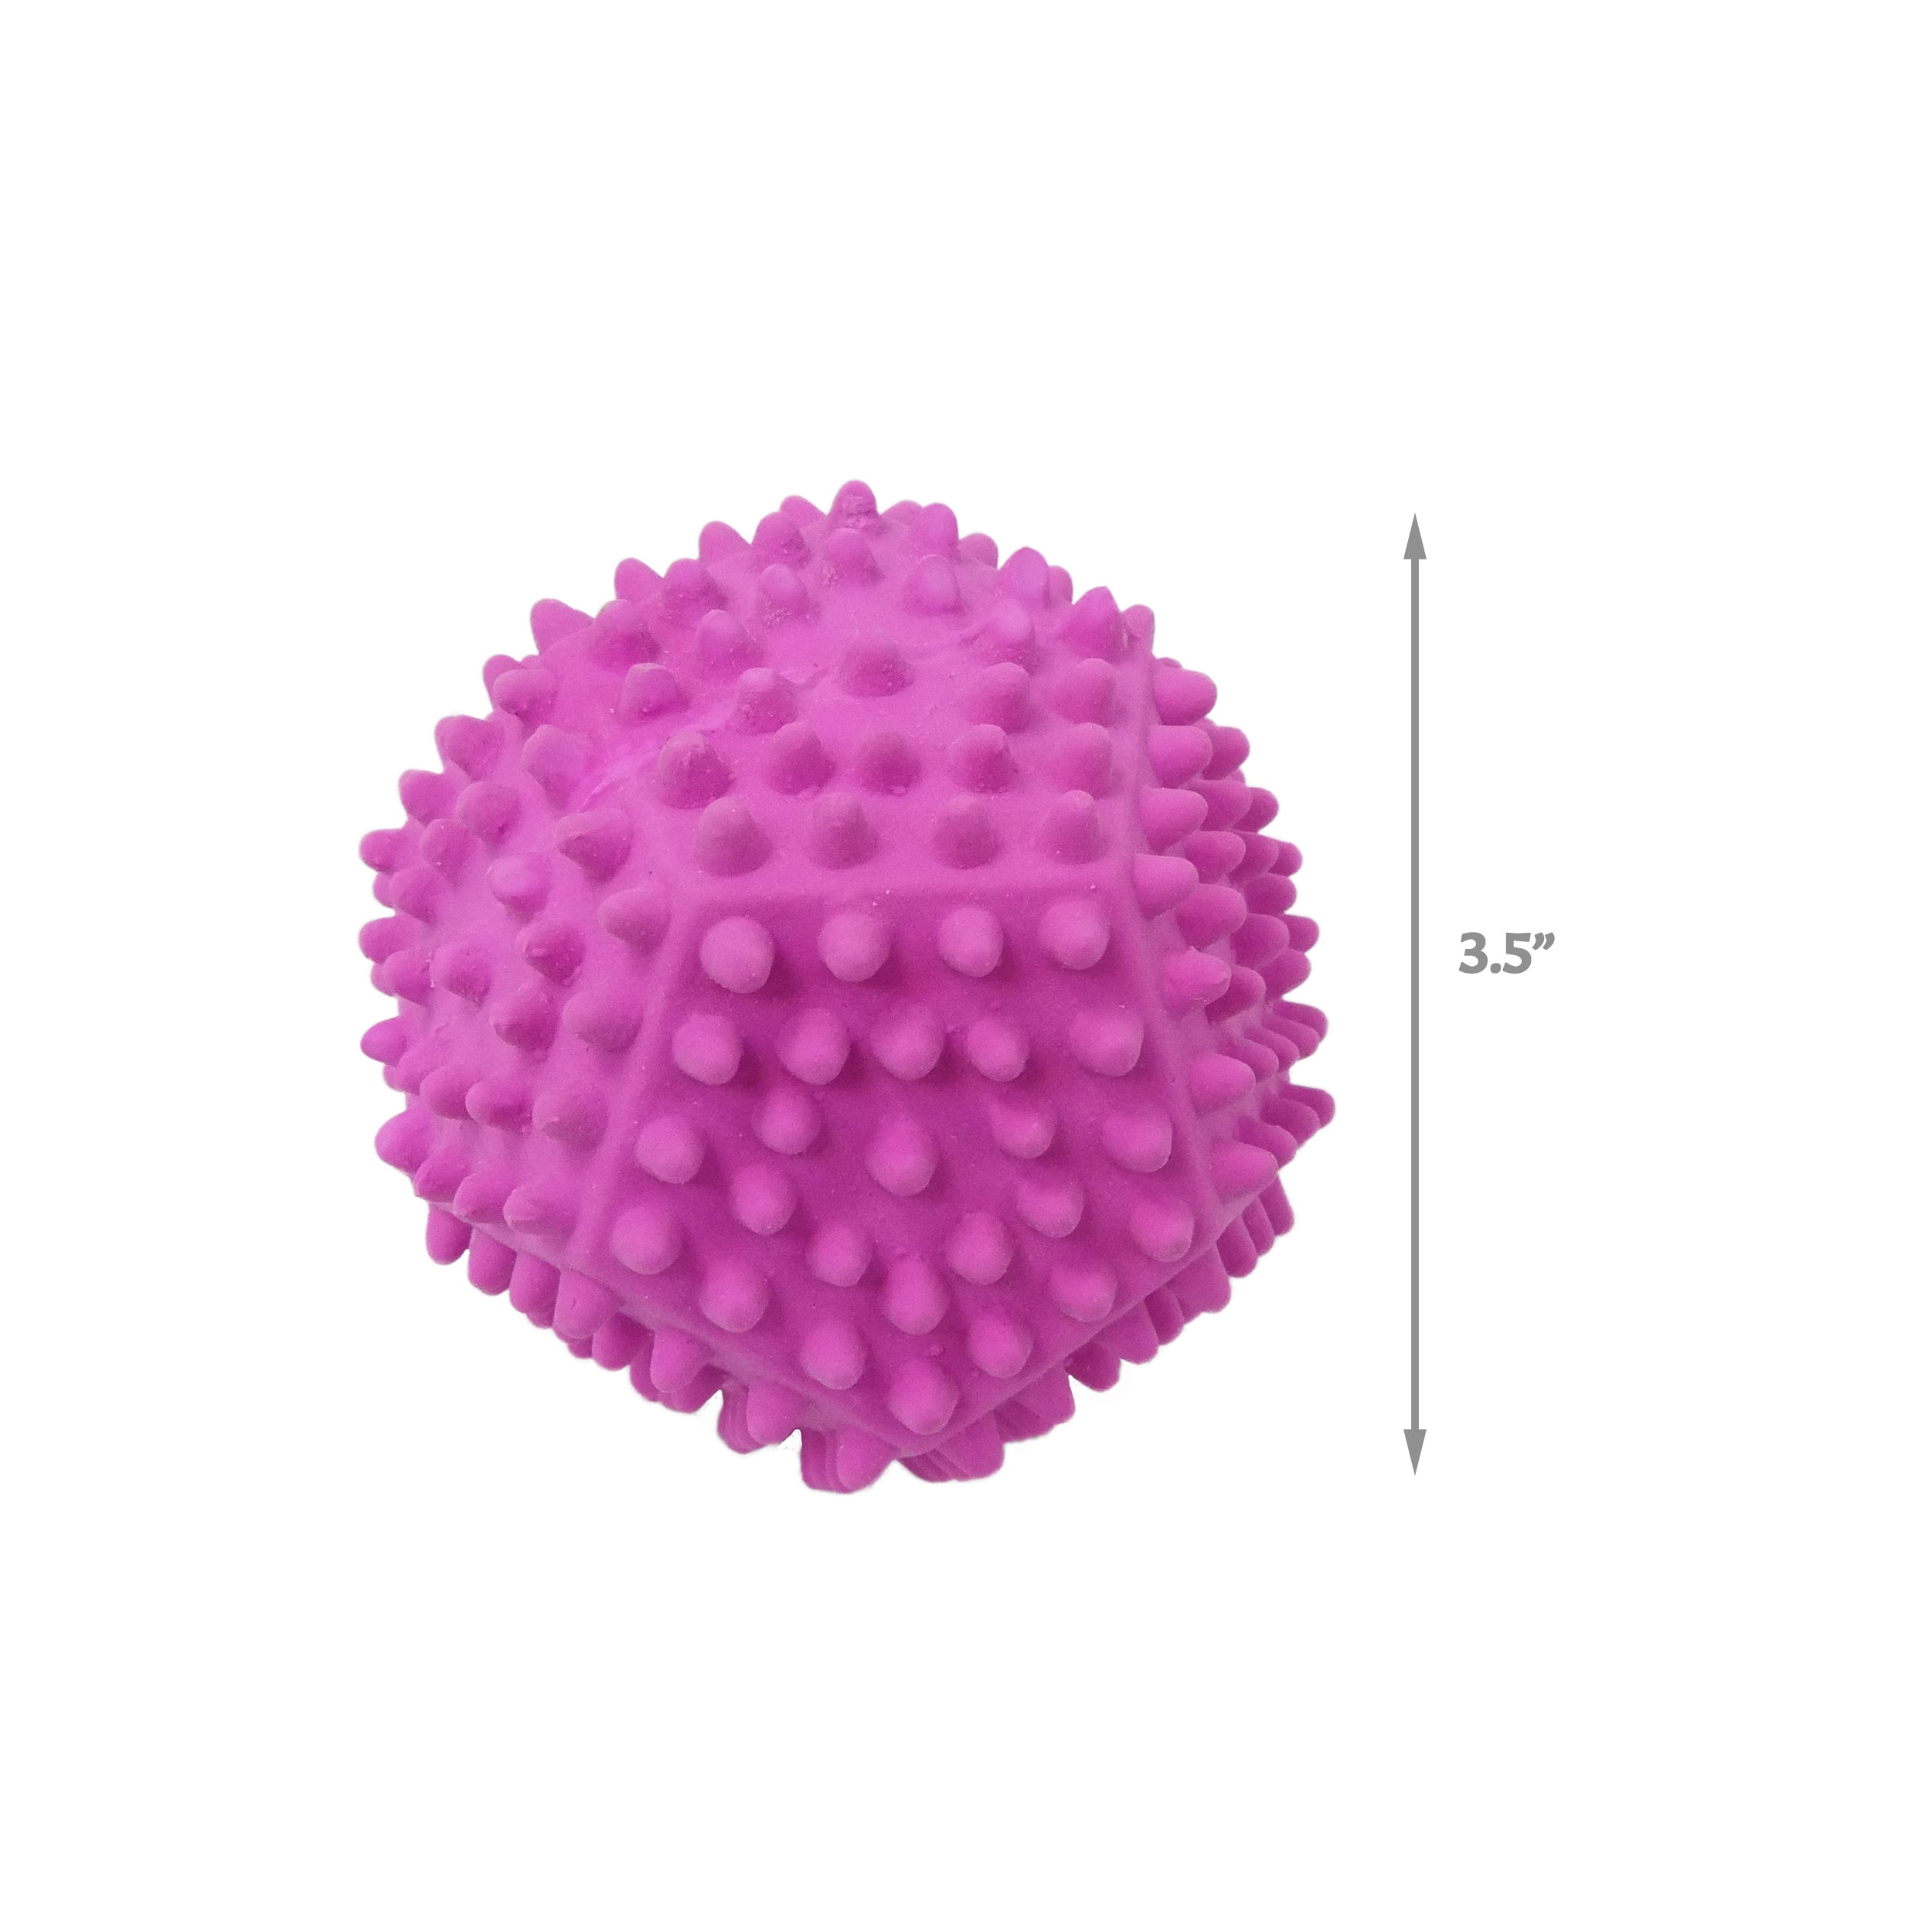 Pentagon Rounded Spikes Squeaking Ball Dog Toy 3.5"